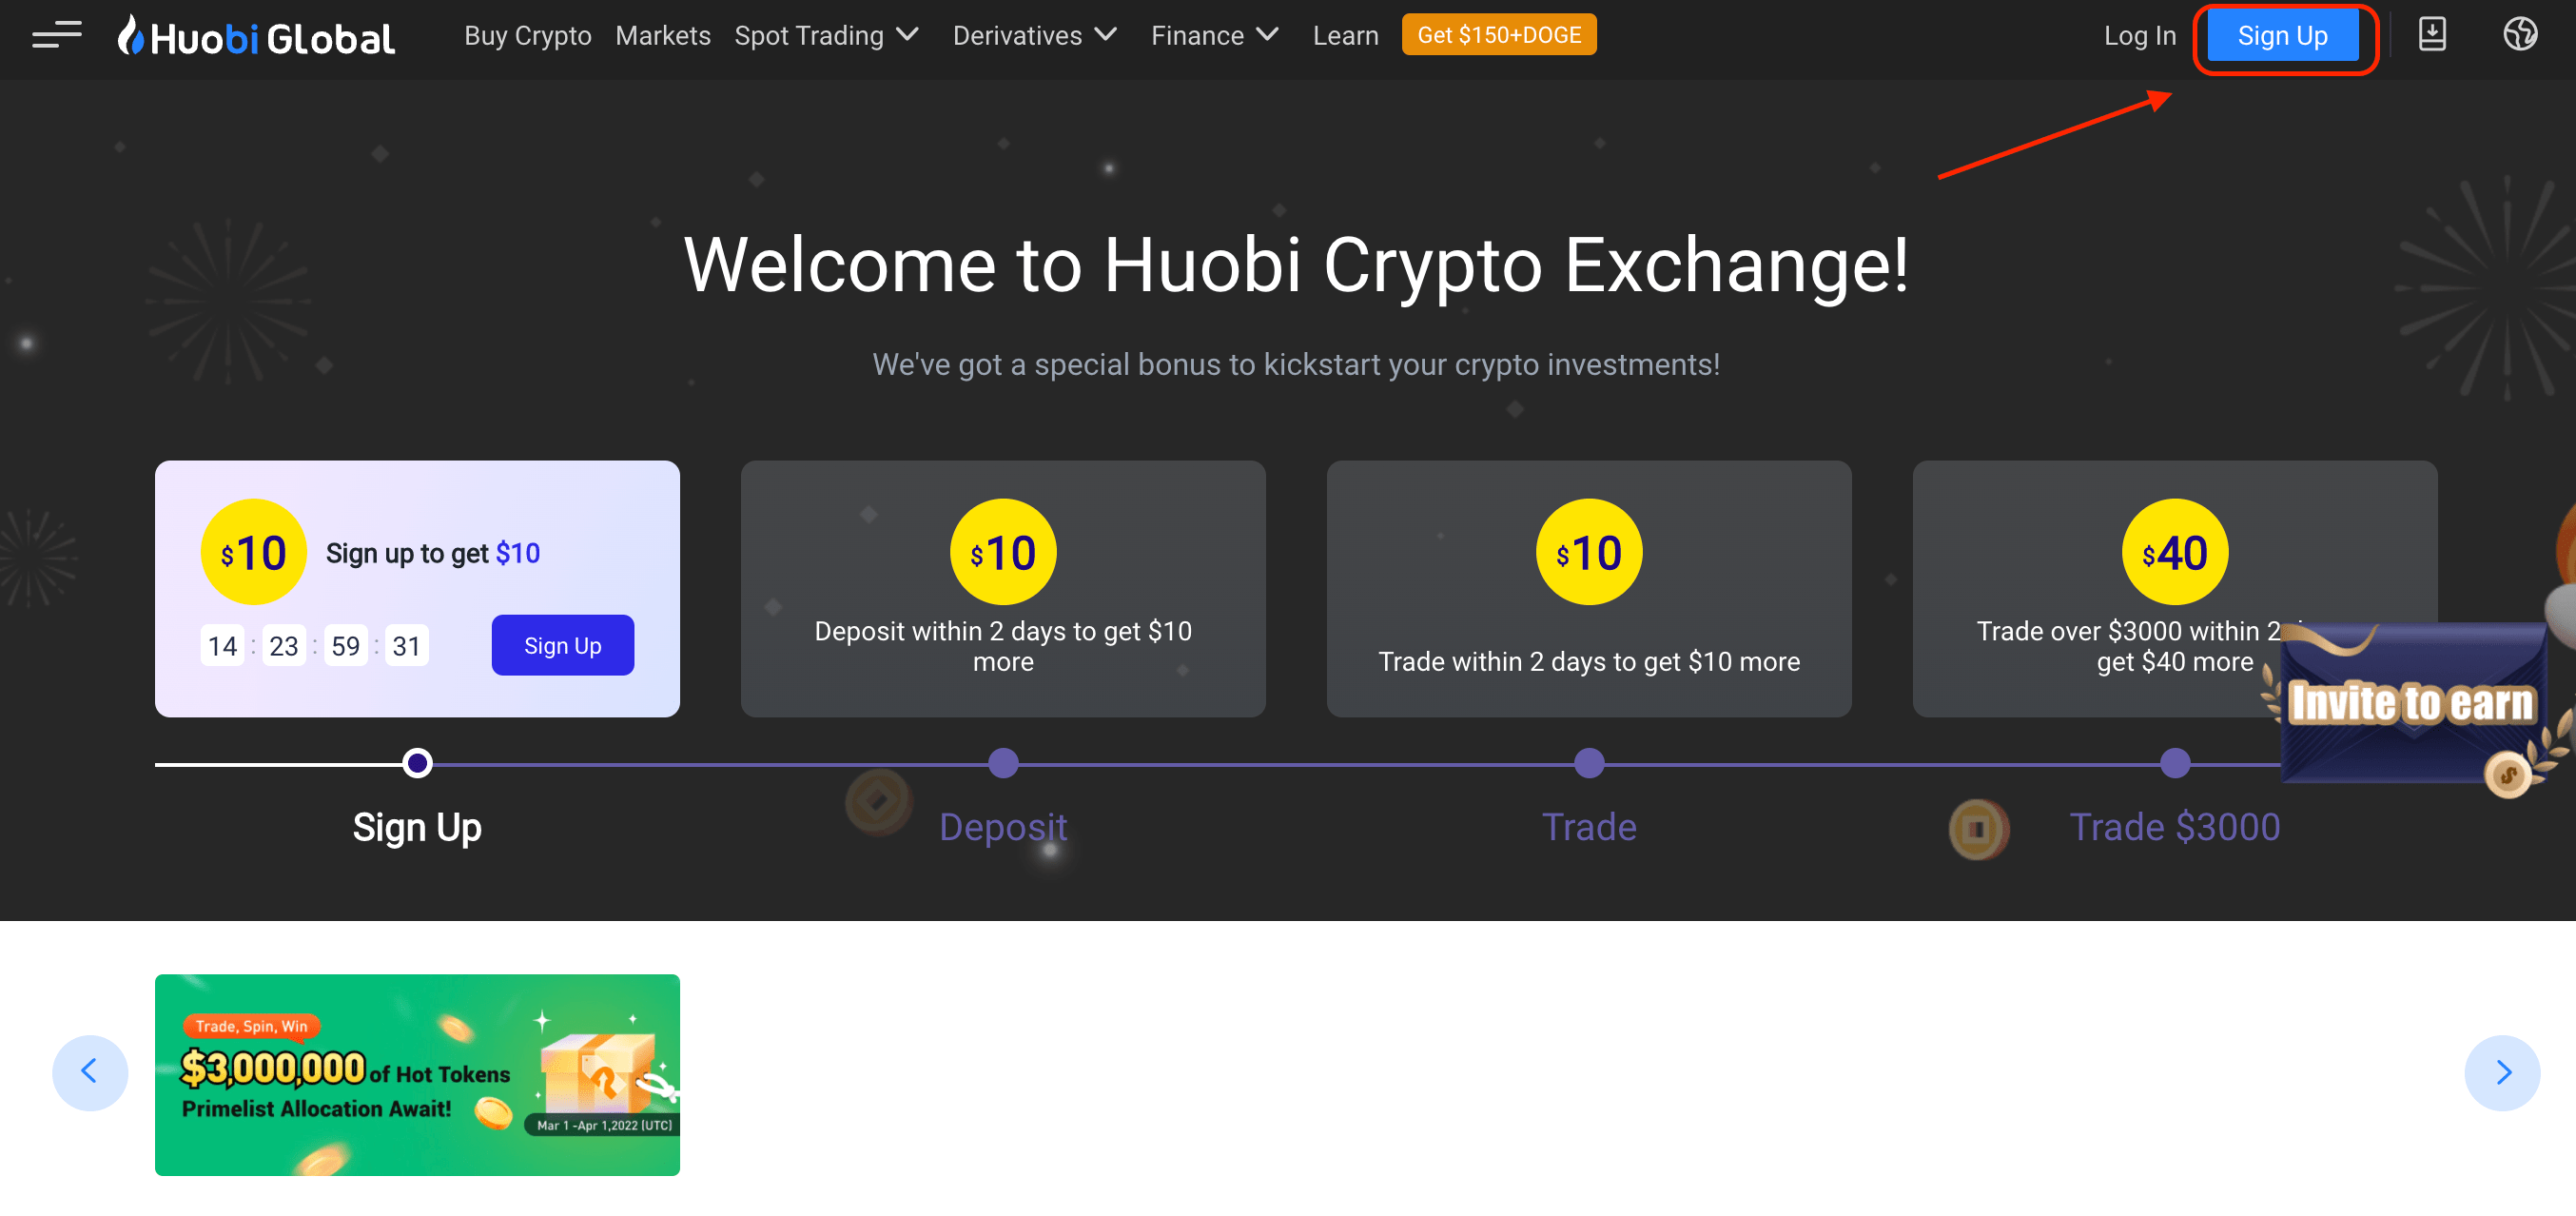 How to open an account on Huobi